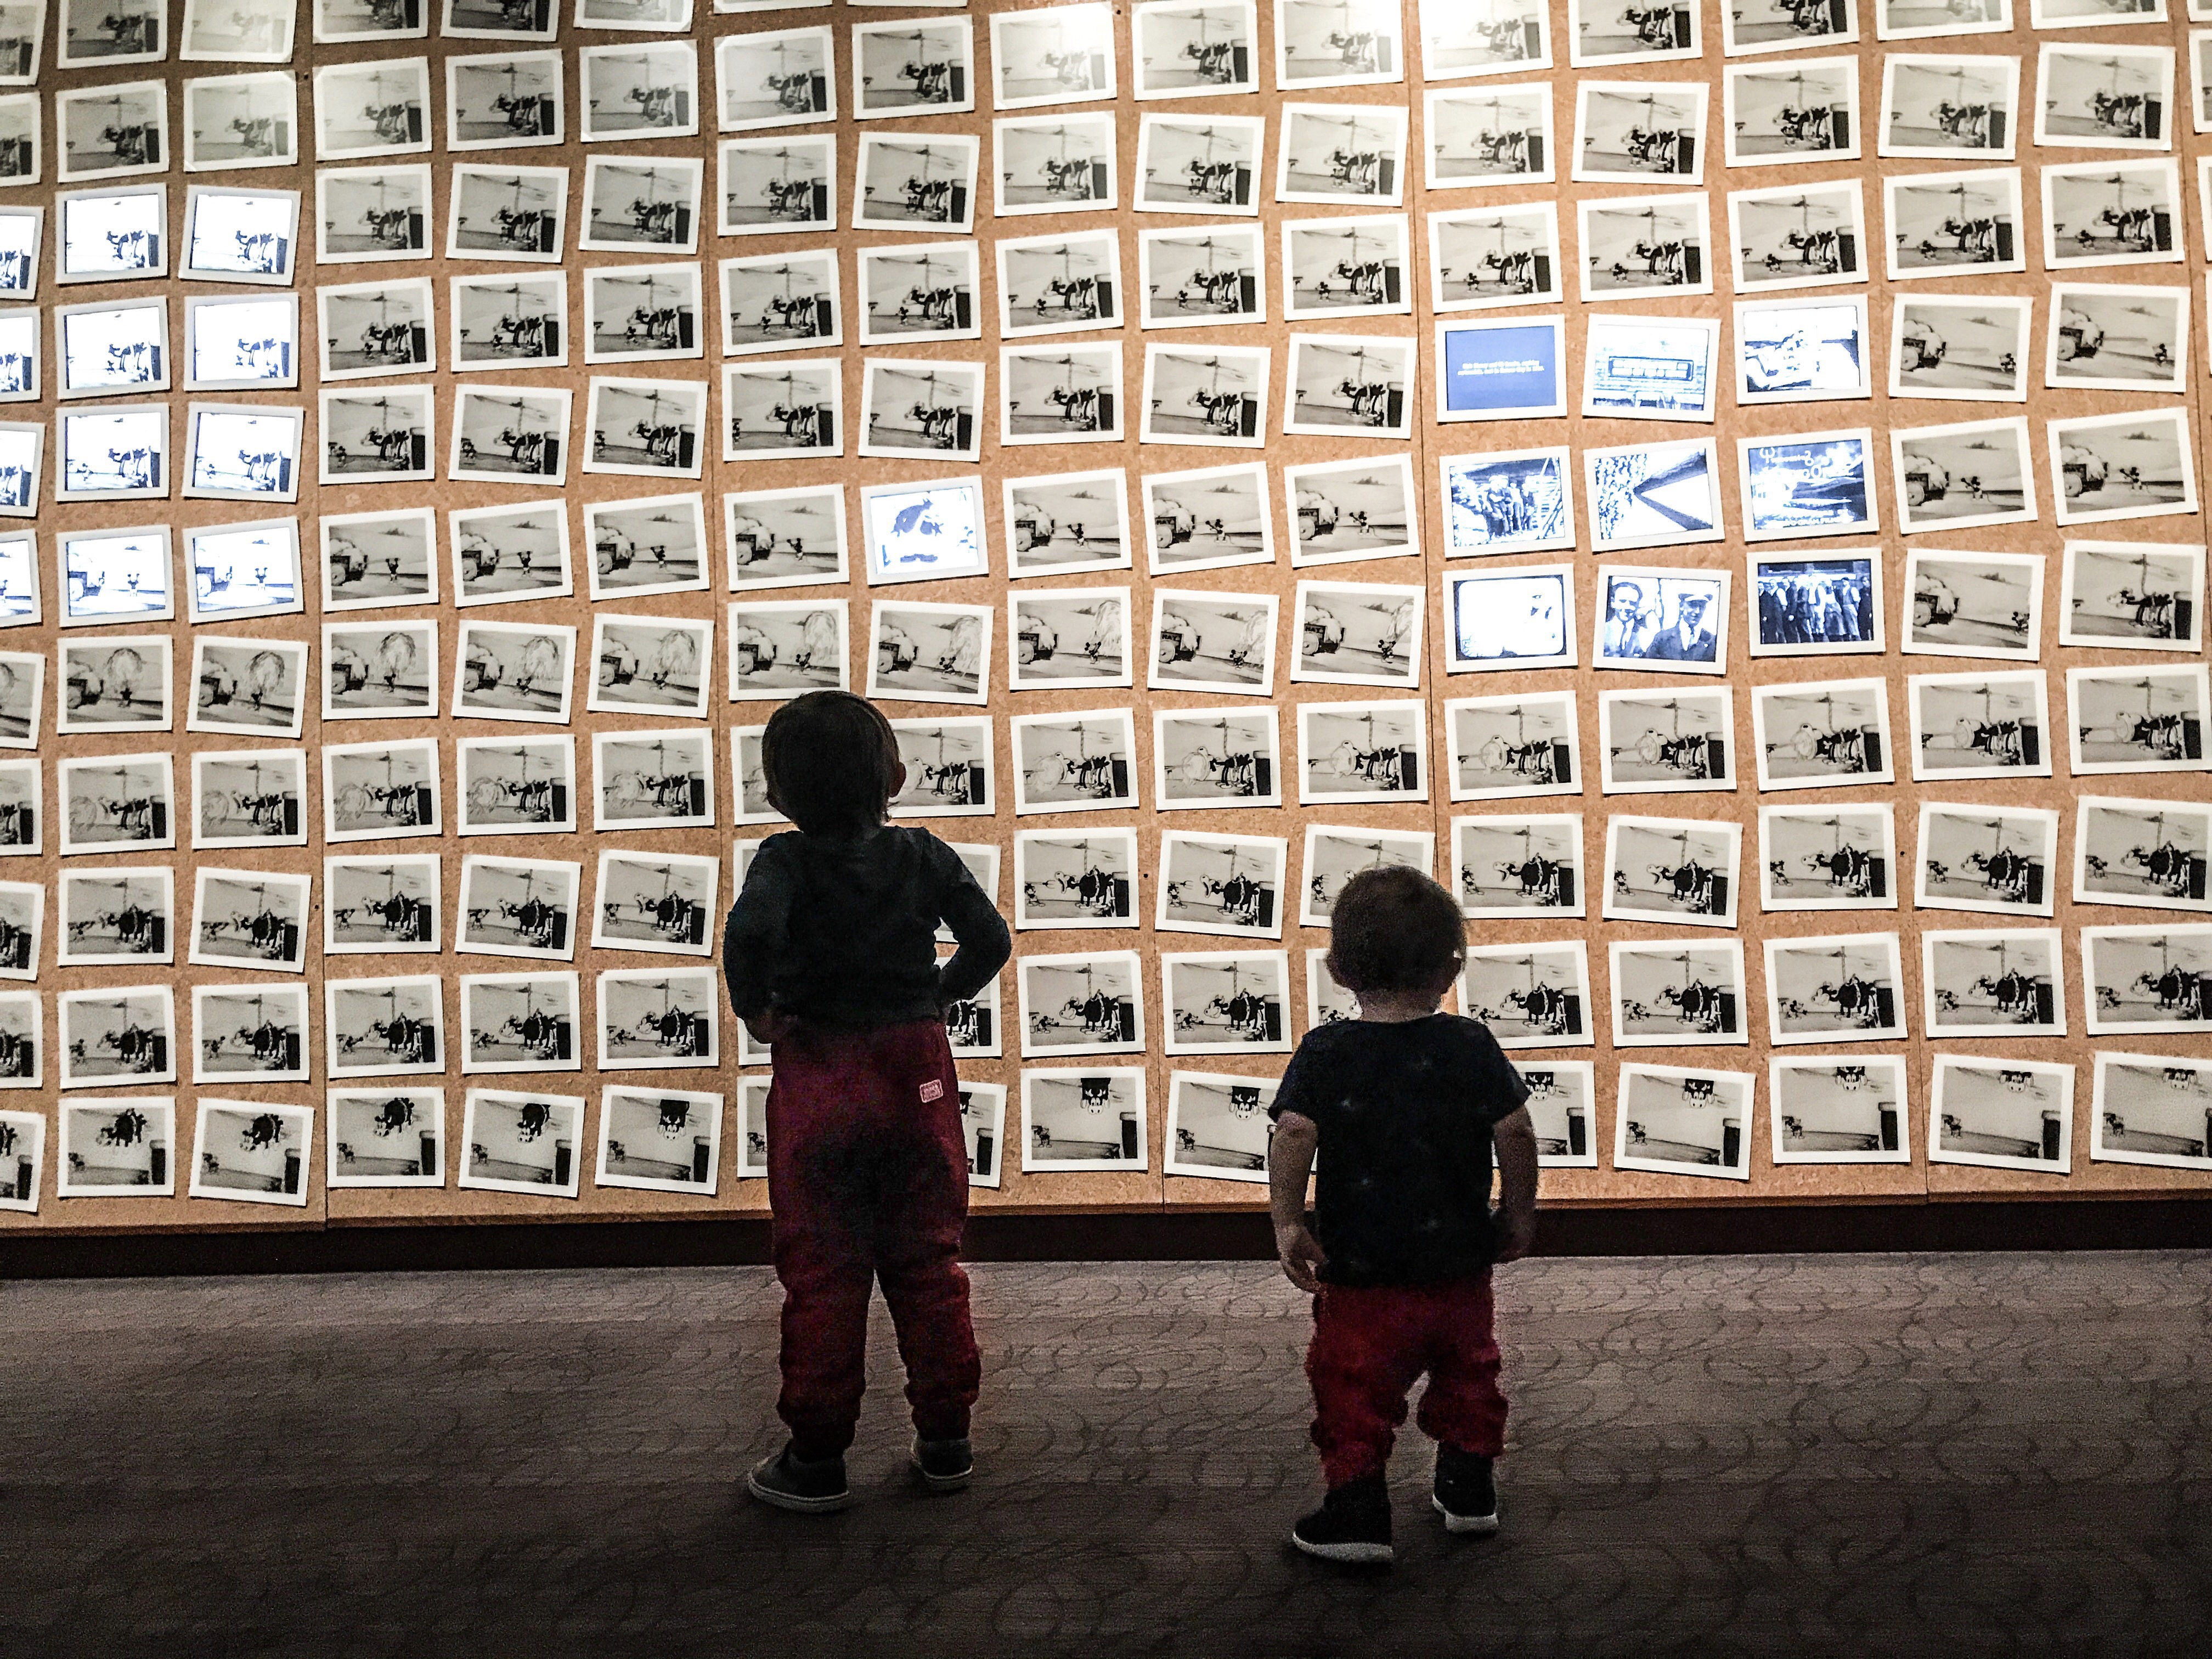 Guide to the Walt Disney Museum in San Francisco | Things to Do in San Francisco with Kids | Henry and Andrew’s Guide (www.henryandandrewsguide.com)